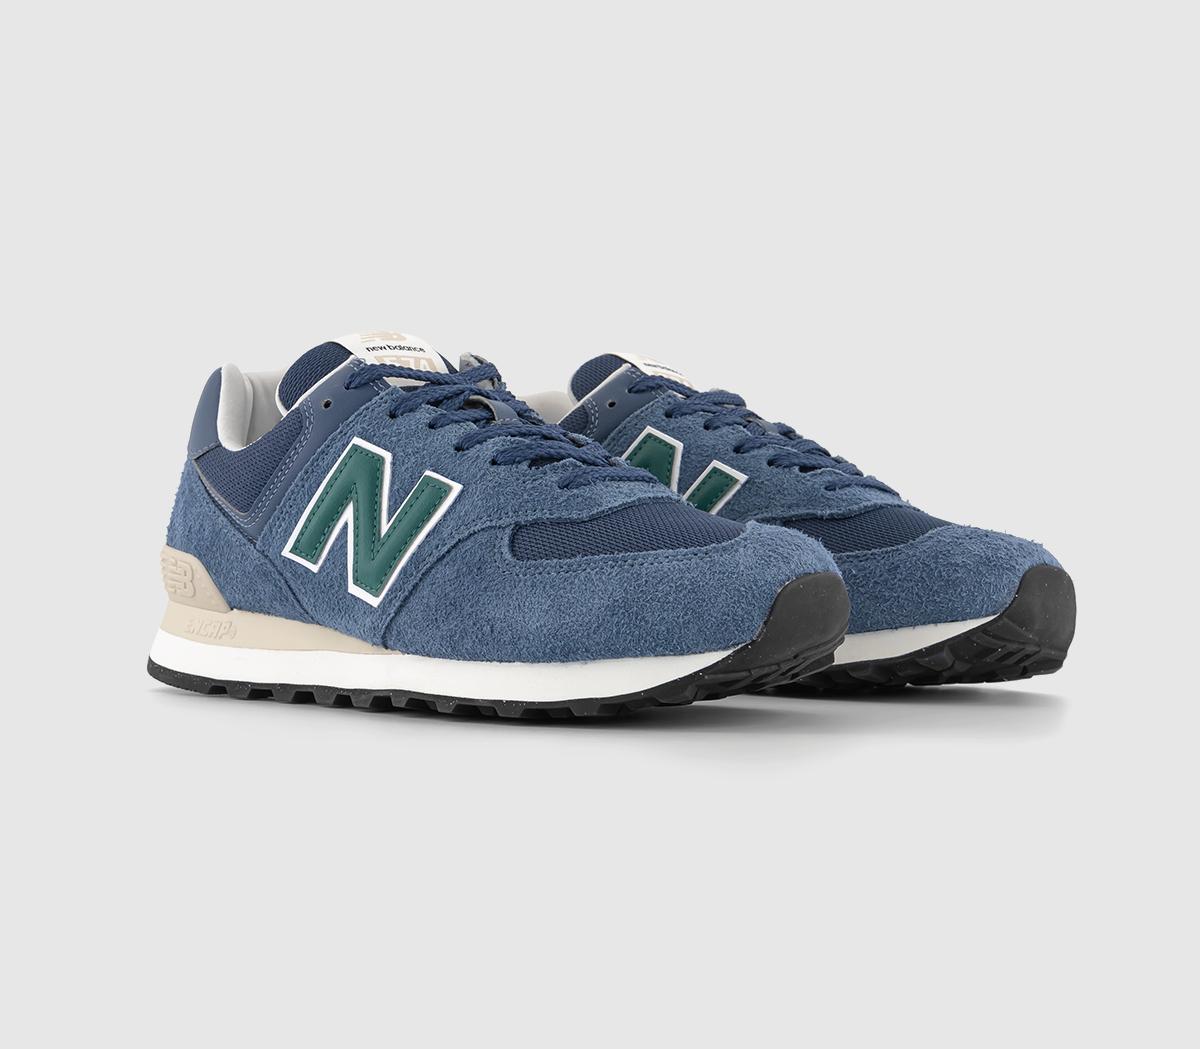 New Balance 574 Trainers Blue Navy Green, 7